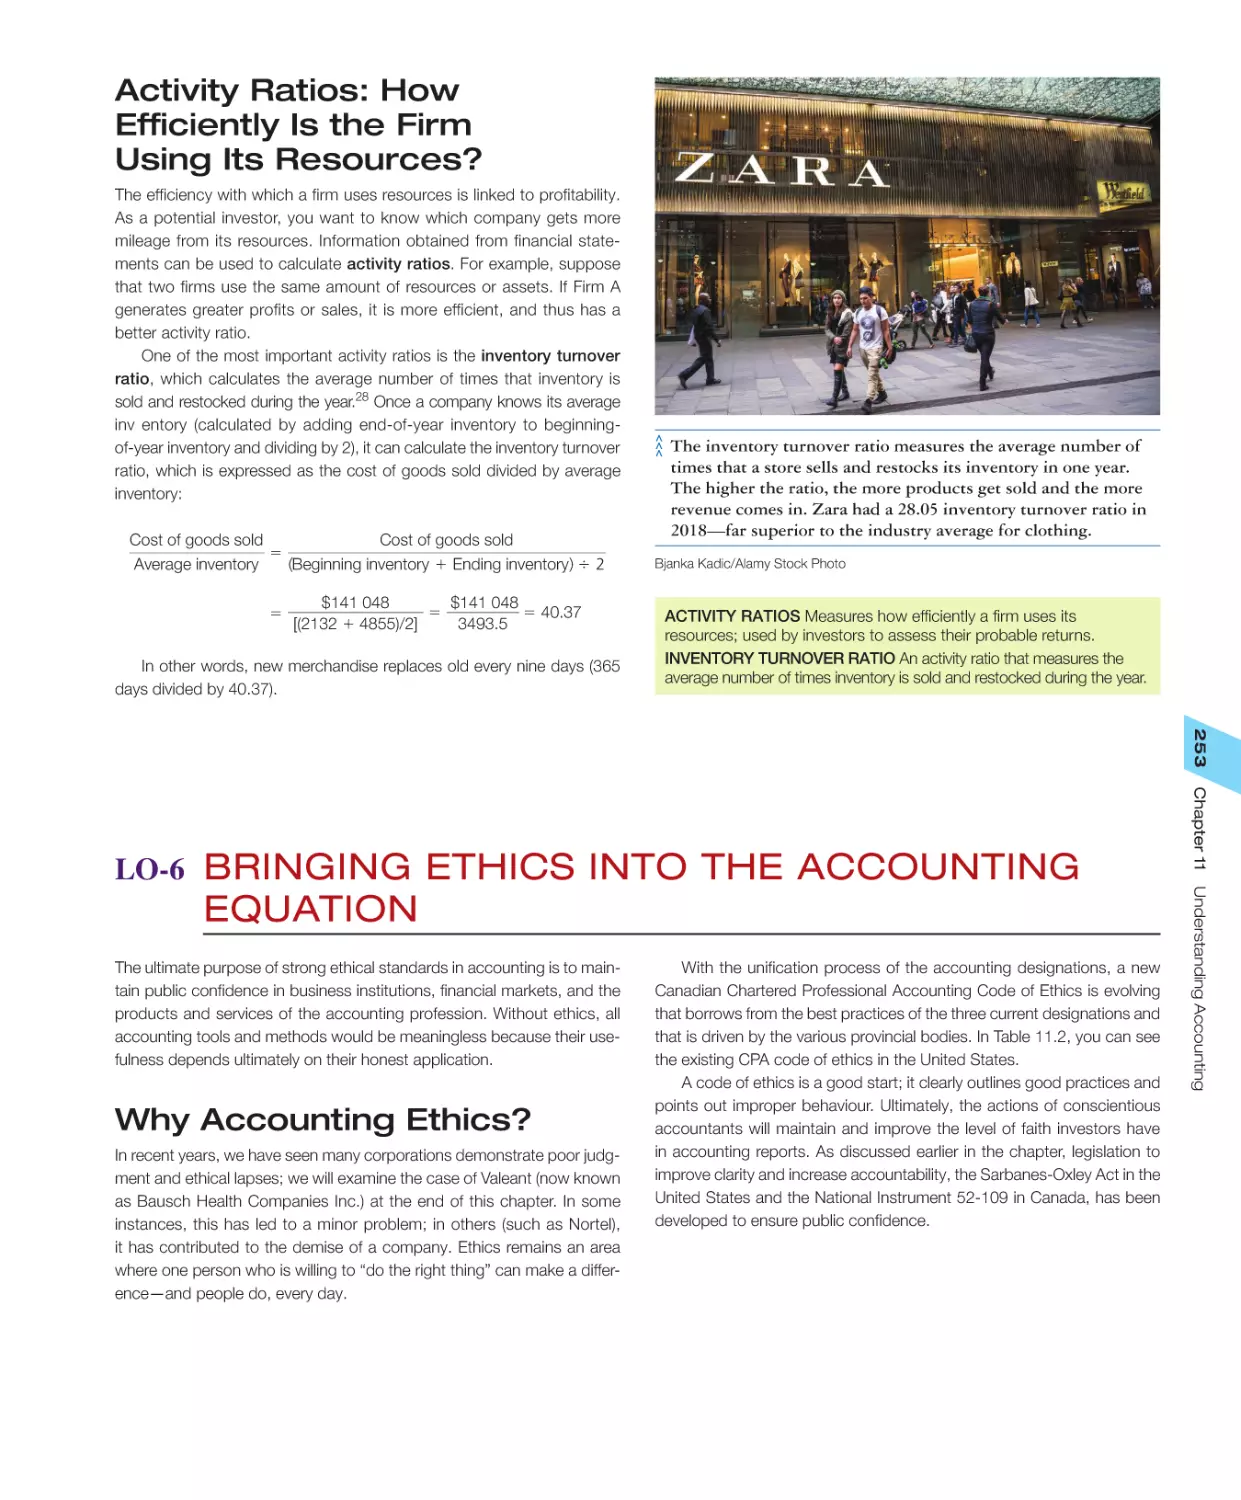 Activity Ratios: How Efficiently Is the Firm Using Its Resources?
LO‐6 Bringing Ethics into the Accounting Equation